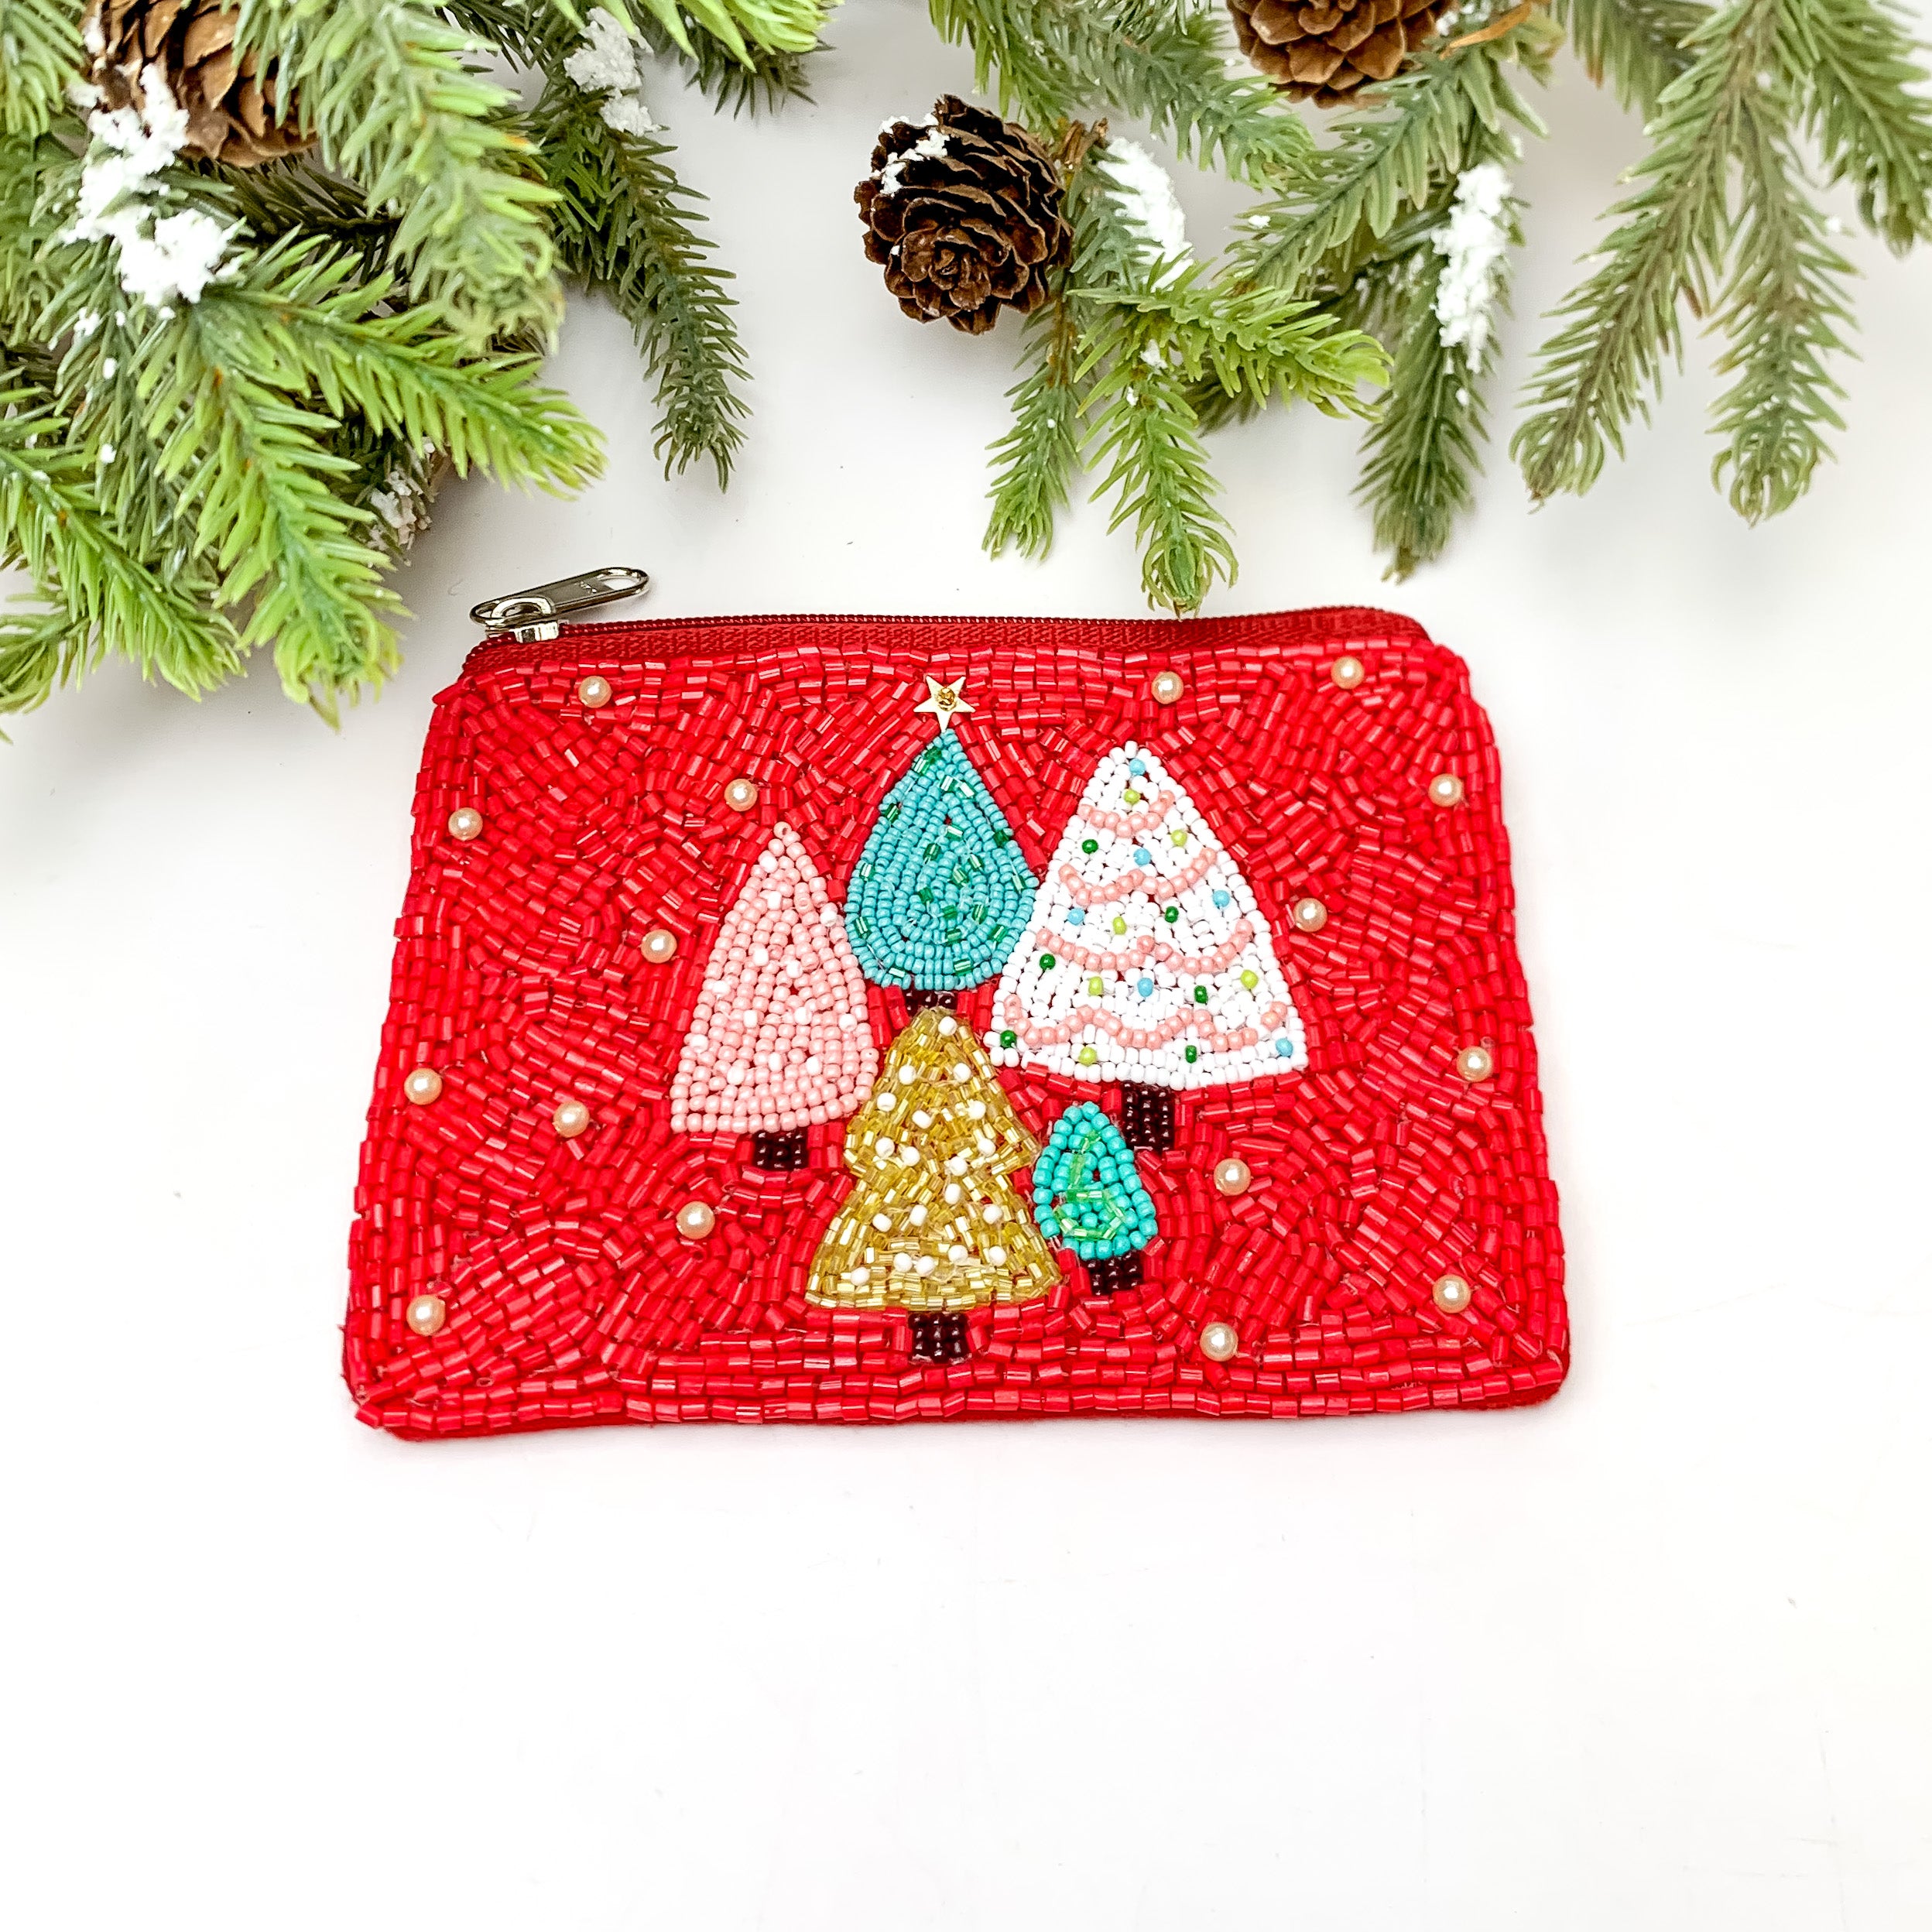 Beaded Coin Purse With Christmas Trees in Red. This coin purse is pictured on a white background with disco balls in the top left corner.